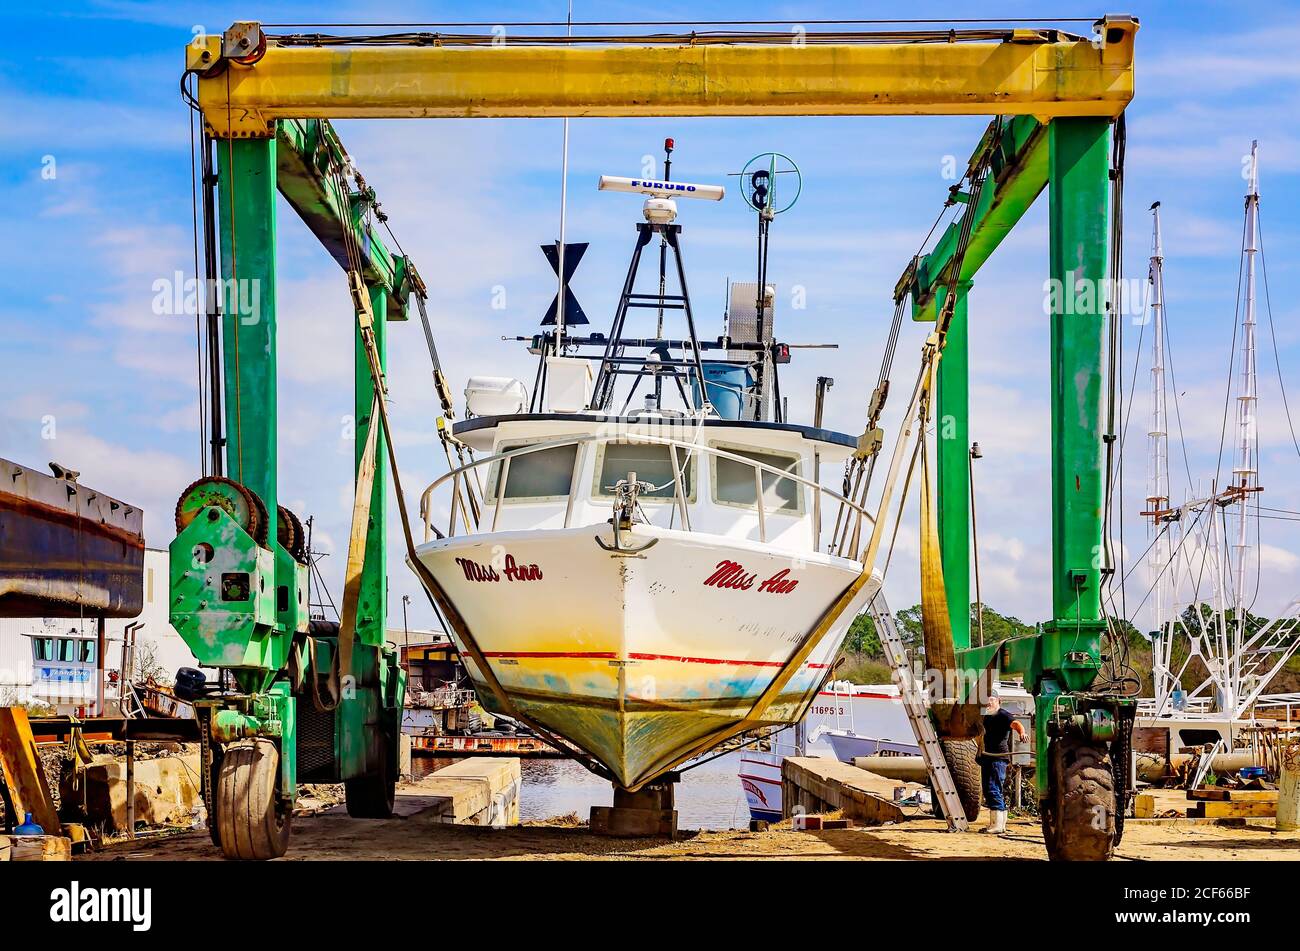 A shrimp boat is hoisted in the air while in dry dock for repair at a local shipyard, Feb. 17, 2018, in Bayou La Batre, Alabama. Stock Photo